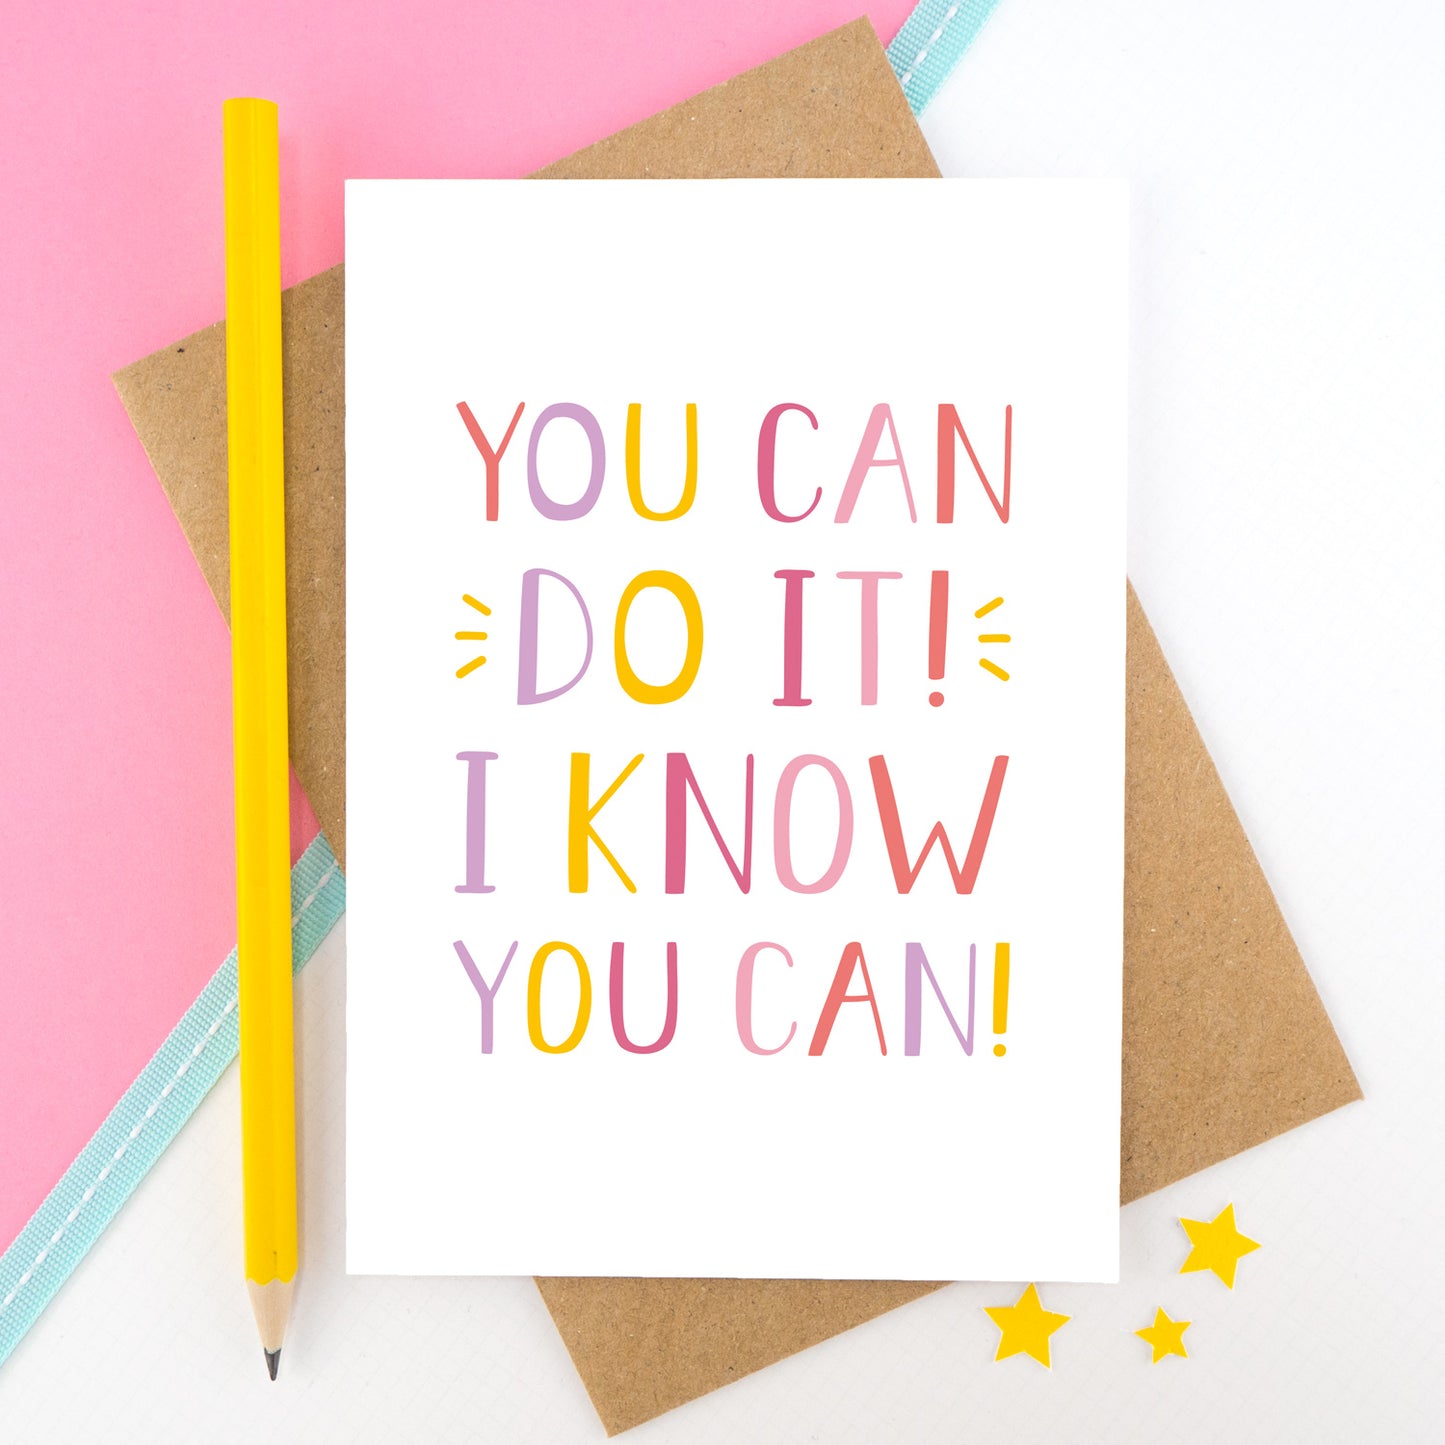 You can do it, I know you can! - Positive encouragement card photographed on a pick and white background separated with a teal ribbon. Also featuring a yellow pencil for scale. This version is in pink, yellow and lilac colour palette.